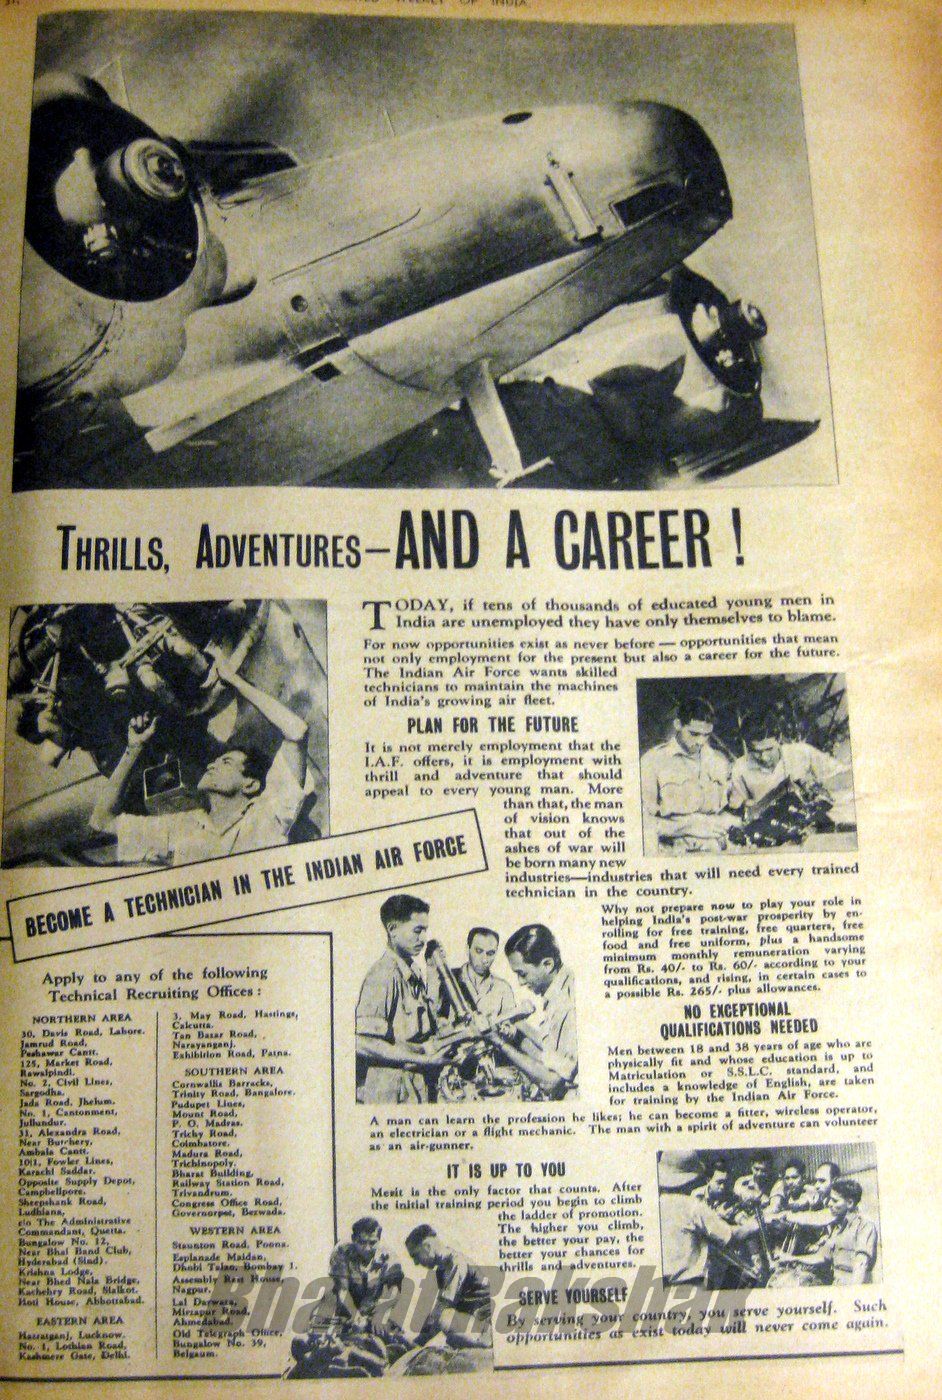 Thrills, Adventure and a Career